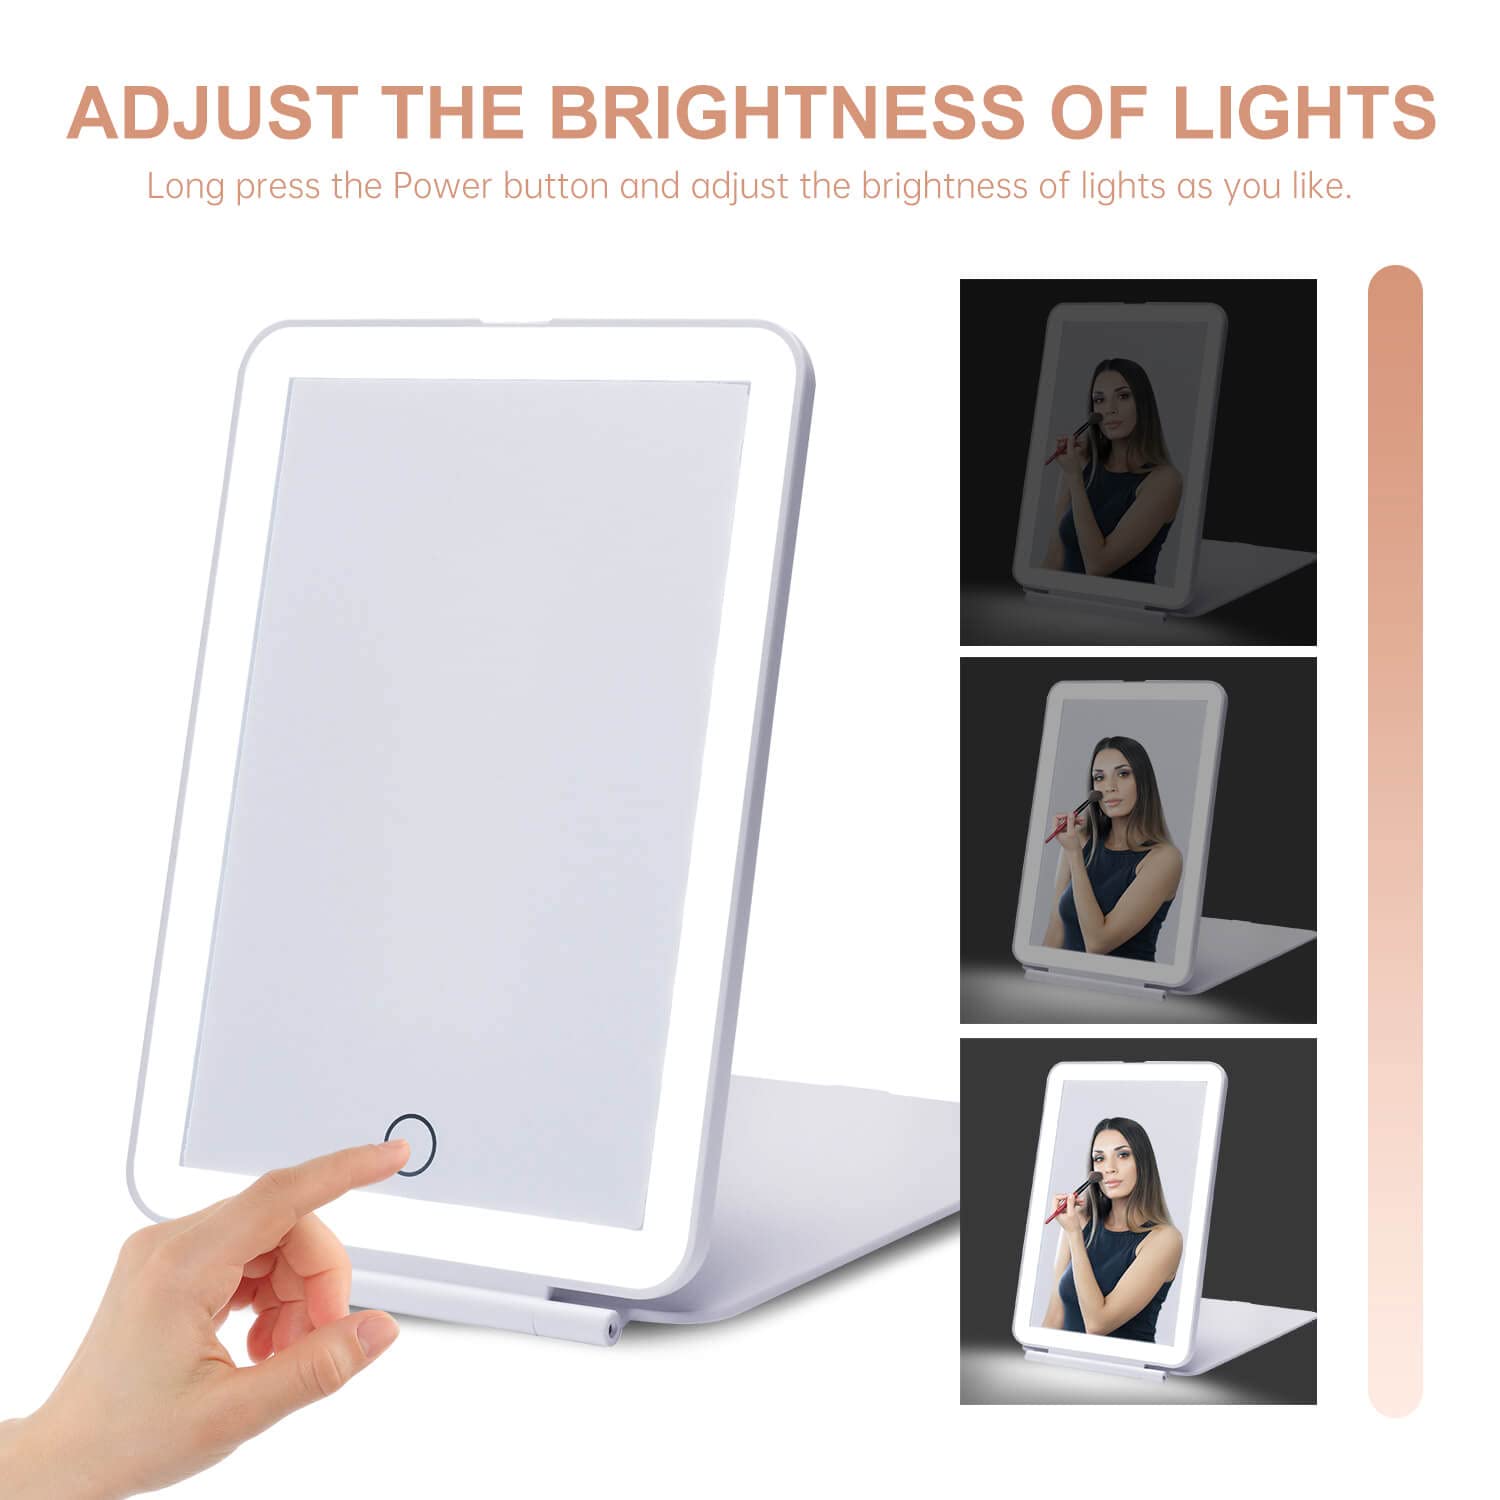 Mocado LED Foldable Travel Makeup Mirror - 5x7 inches 3 Colors Light Modes USB Rechargeable Touch Screen, Portable Tabletop Cosmetic Mi